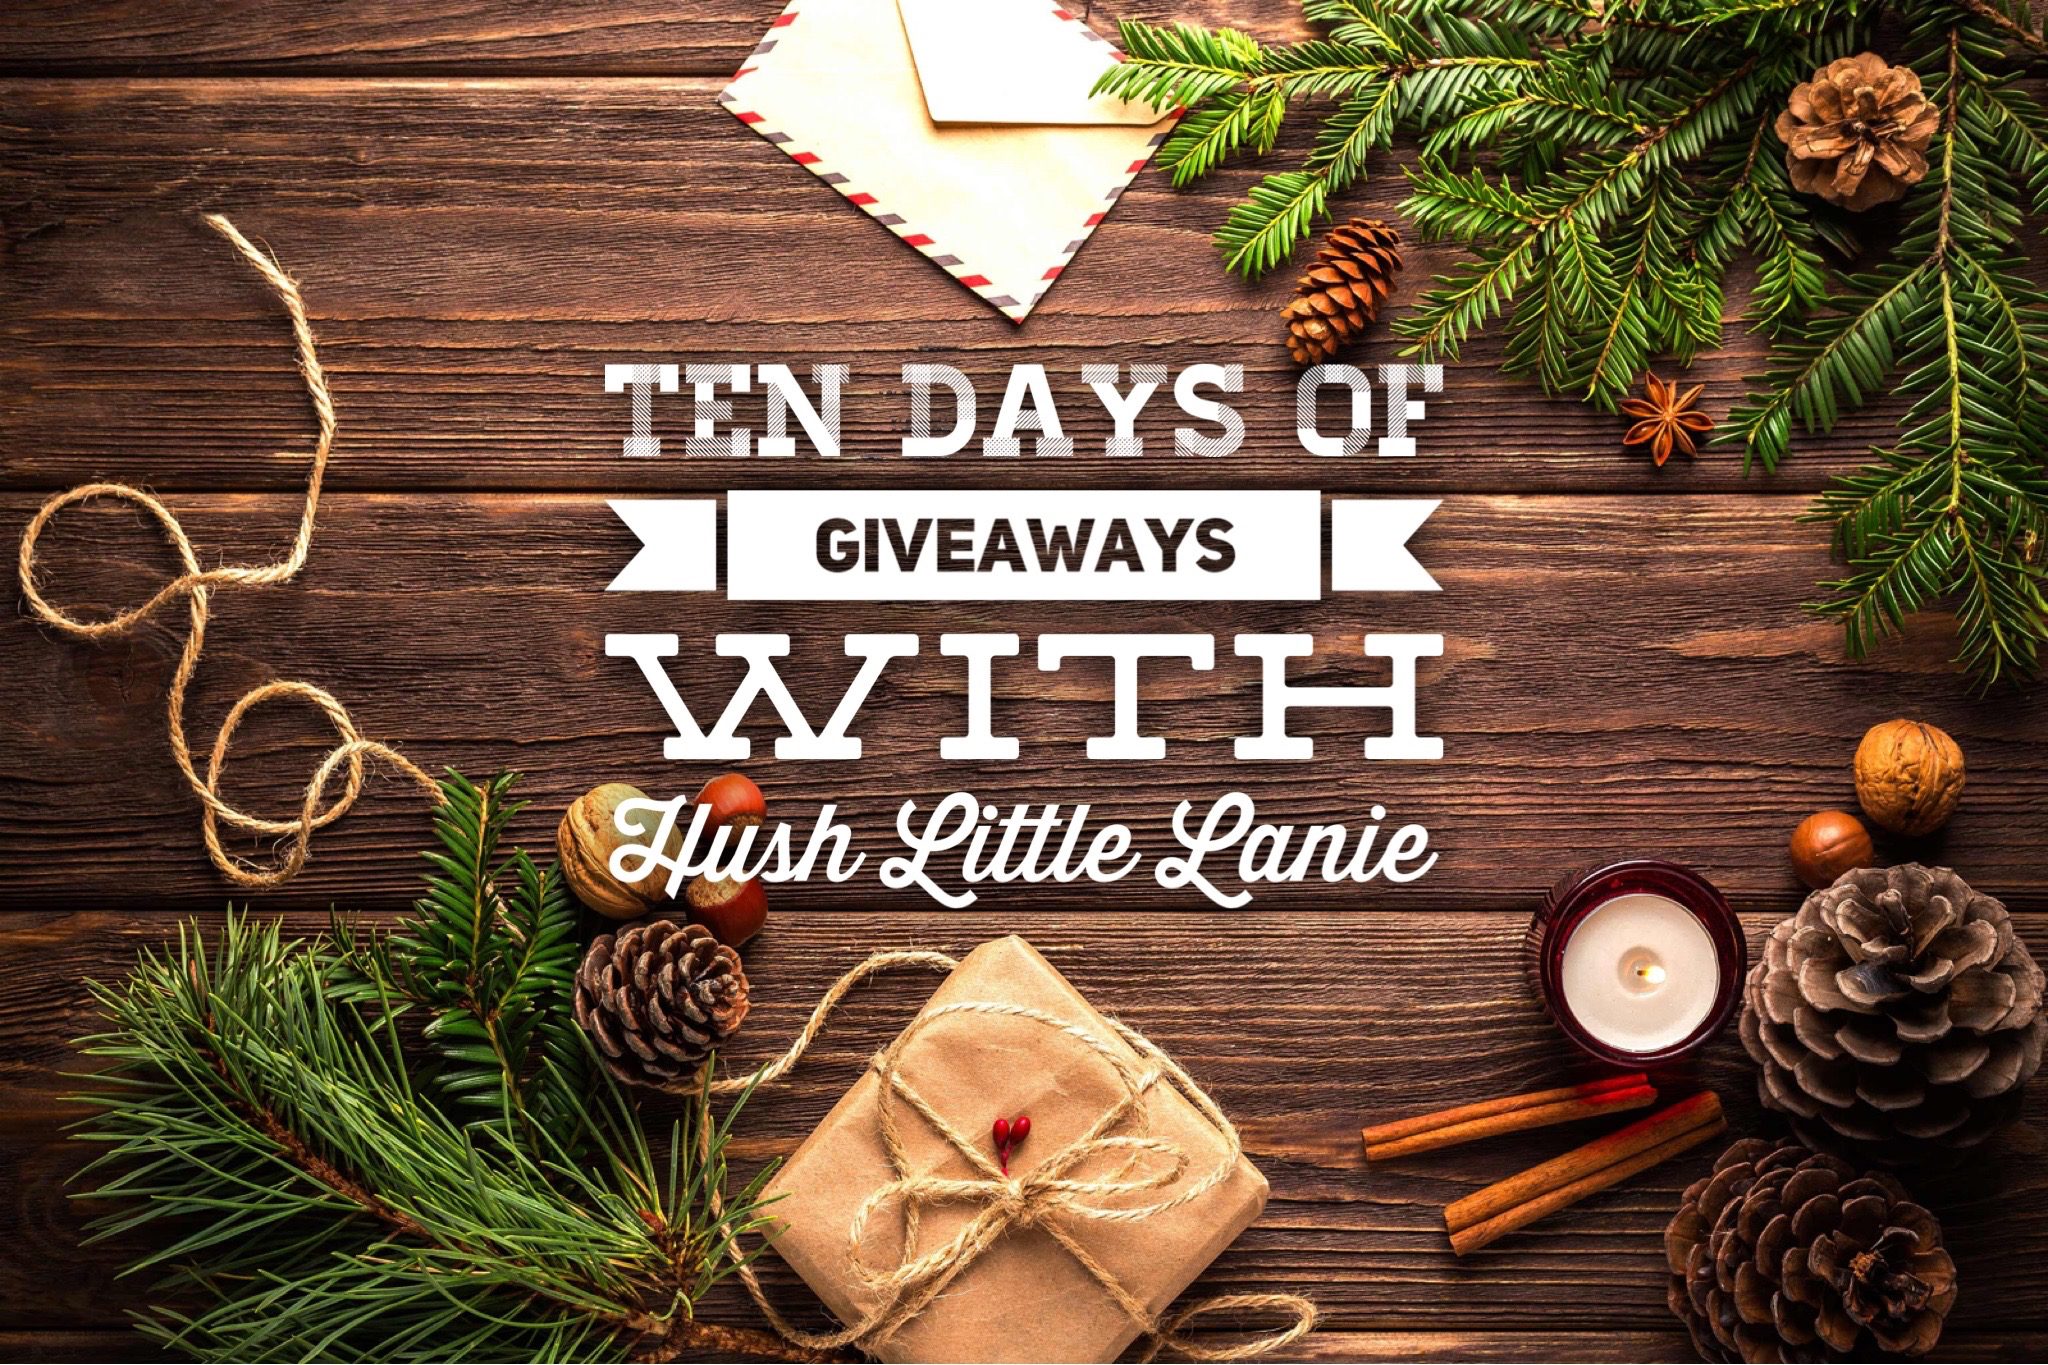 Hush Little Lanie: A Baby Boutique, is having a Ten Days of Giveaways event! 